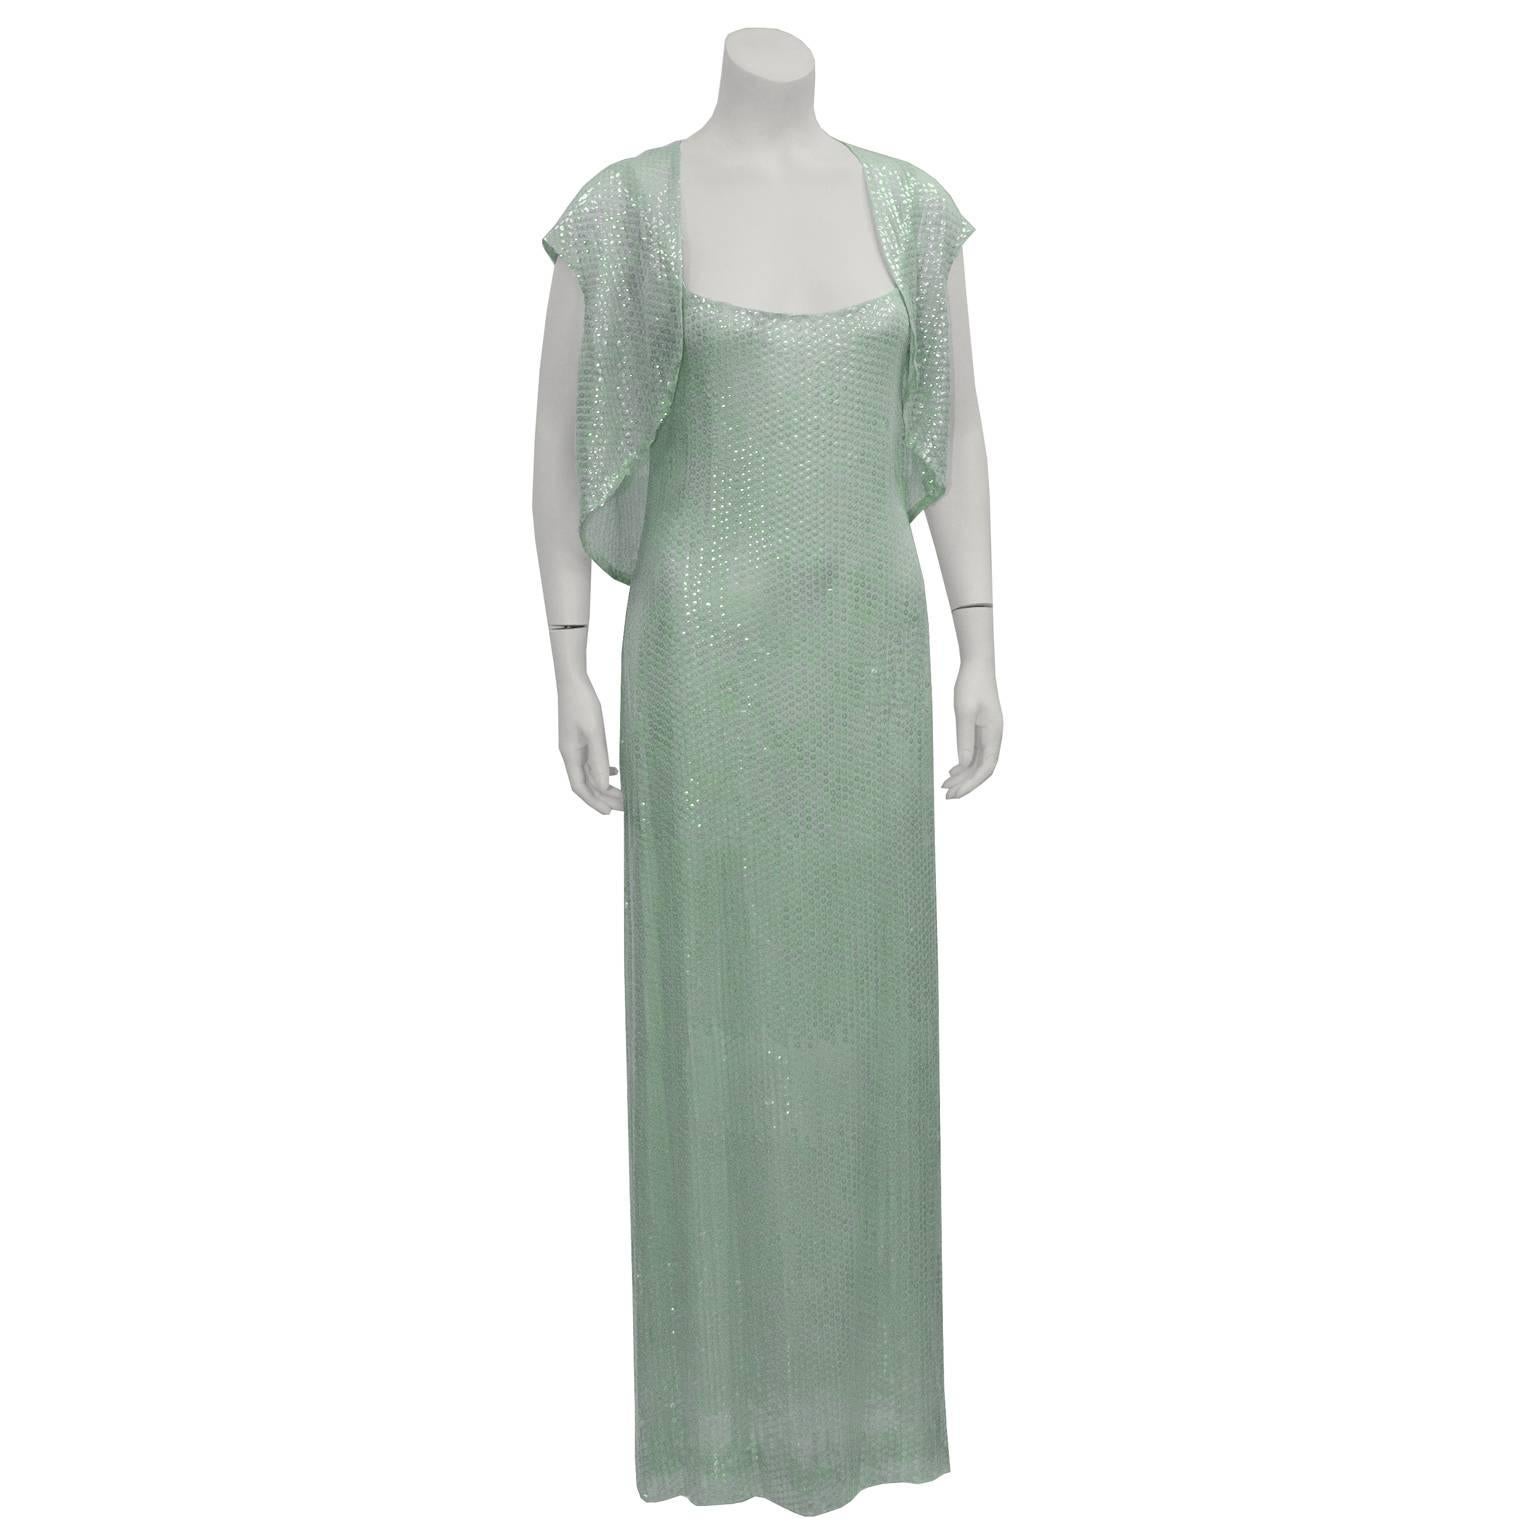 This stunning 1970s Halston gown is mint green silk chiffon covered entirely with iridescent mint sequins. Gown has a sheath silhouette, with a camisole neckline. Fully lined in chiffon. Matching bolero is short sleeved and also entirely covered in